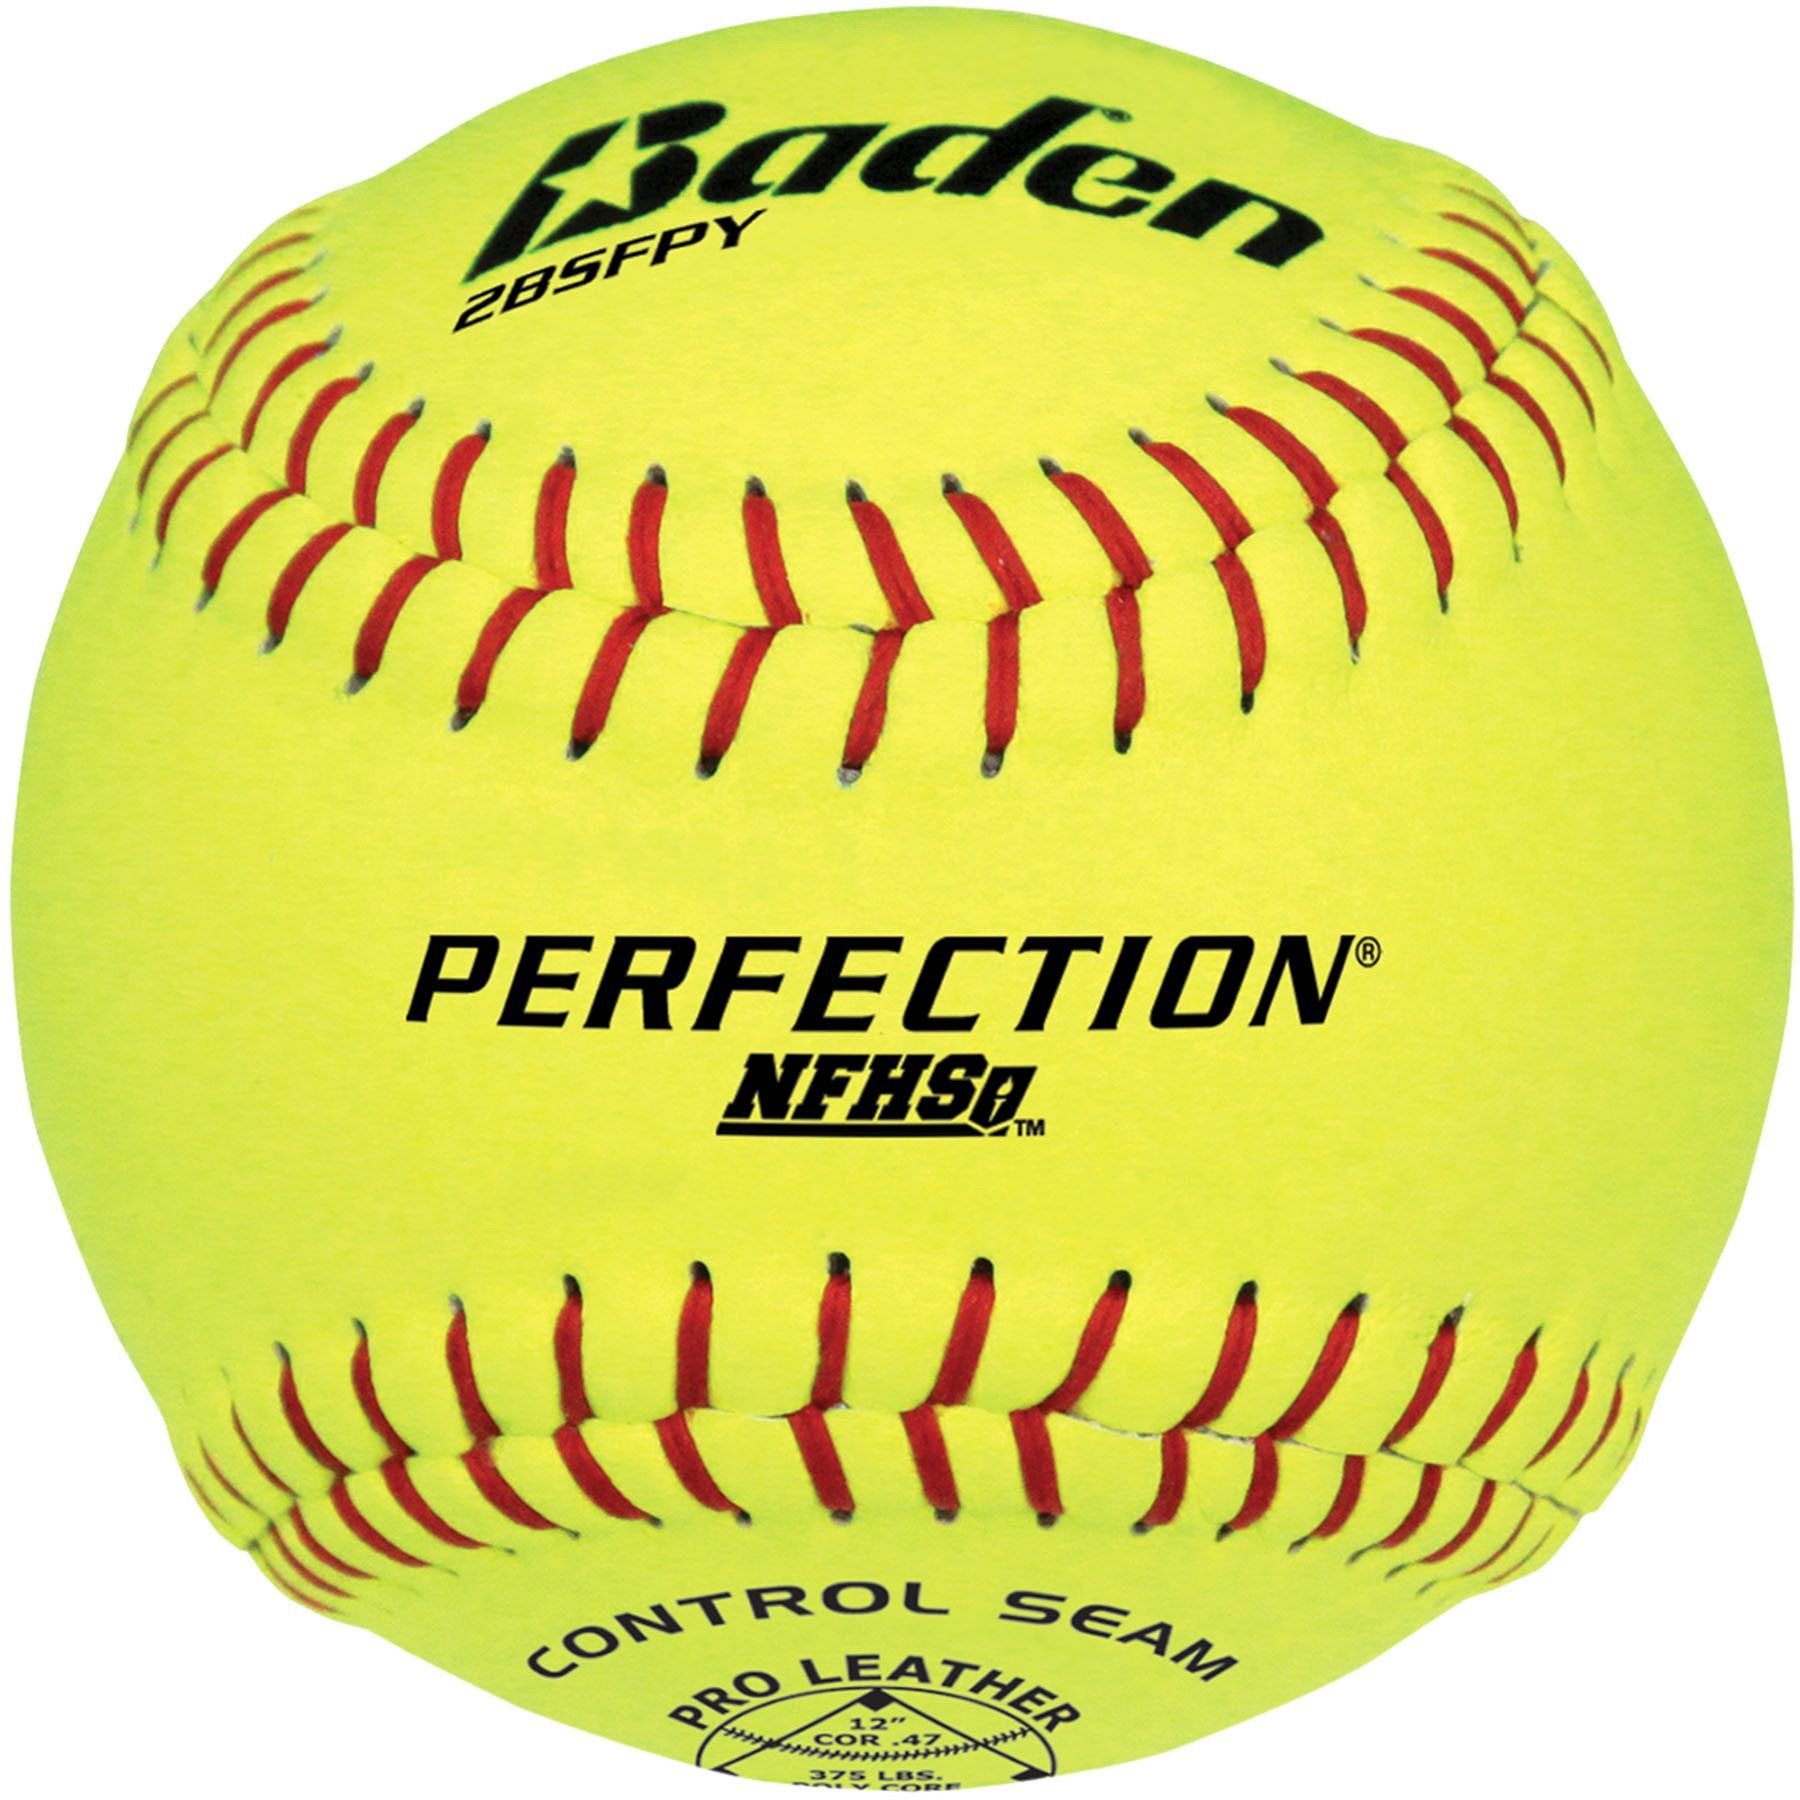 Perfection ® NFHS Game Ball